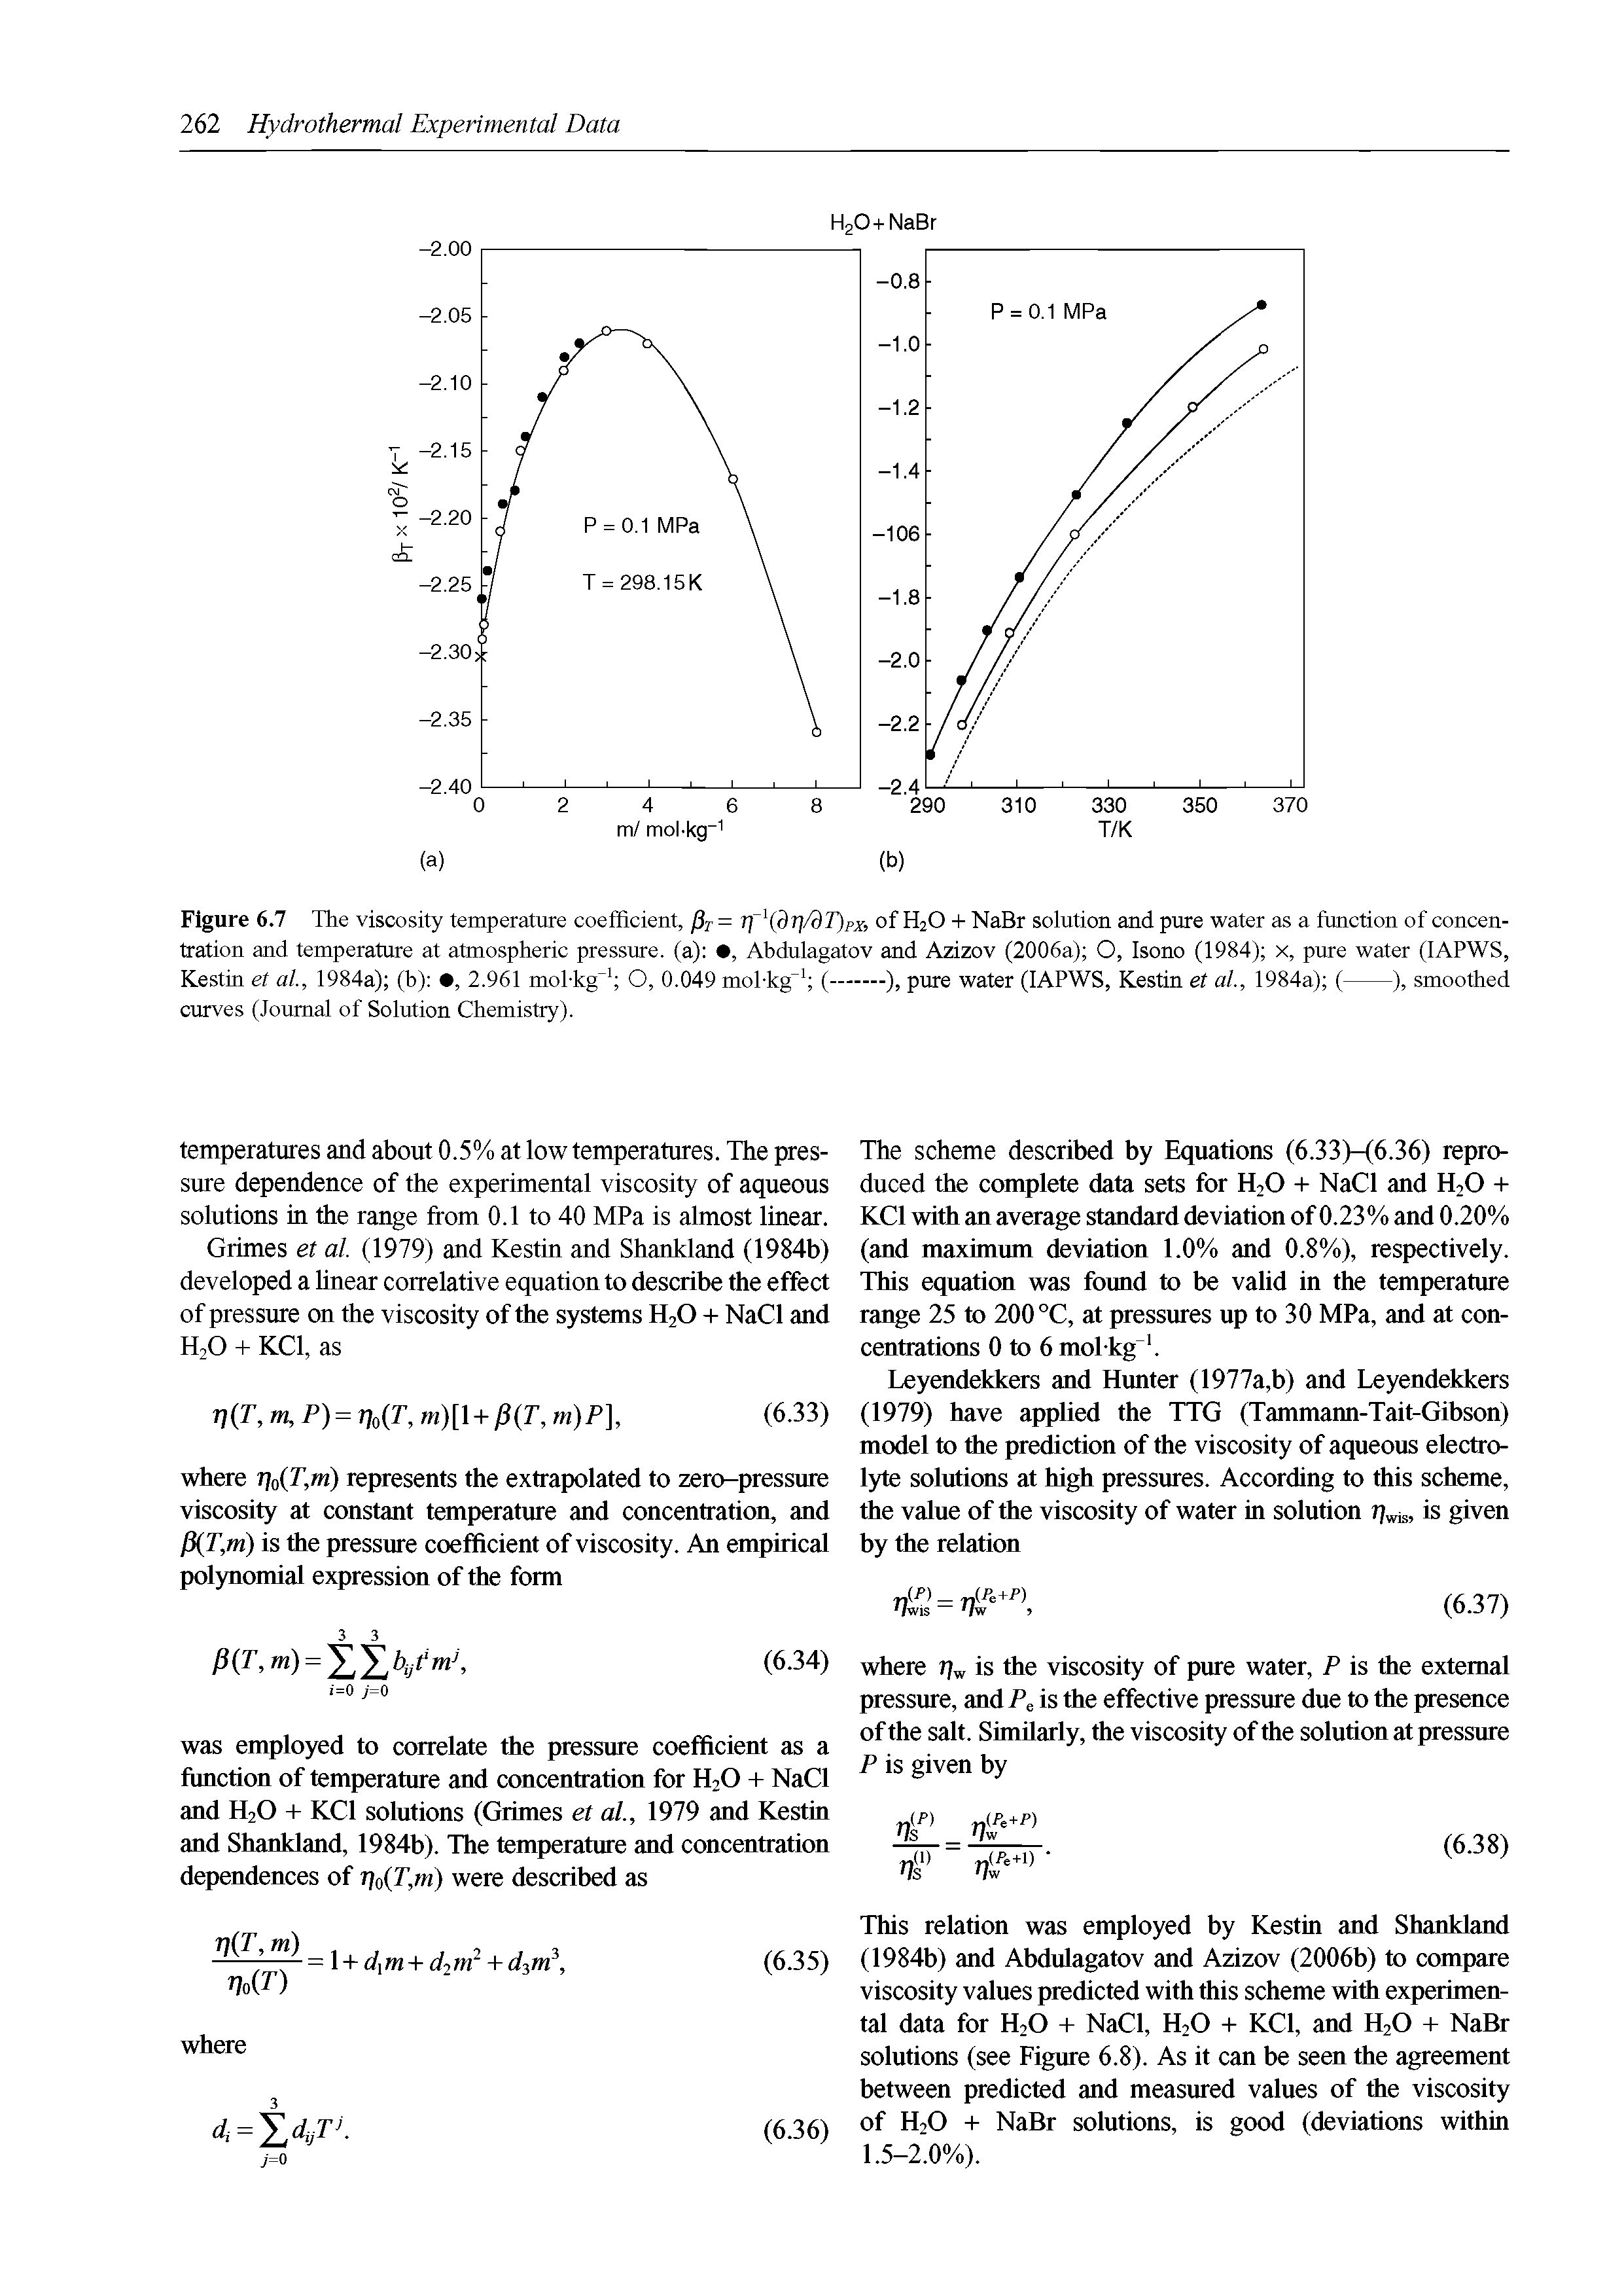 Figure 6.7 The viscosity temperature coefficient, fir = r[ dr /dT)px, of H2O + NaBr solution and pure water as a function of concentration and temperature at atmospheric pressure, (a) , Abdulagatov and Azizov (2006a) O, Isono (1984) x, pure water (lAPWS, Kestrn et al, 1984a) (h) , 2.961 mol kg O, 0.049 mol-kg (--------), pure water (lAPWS, Kestin et al., 1984a) (------), smoothed...